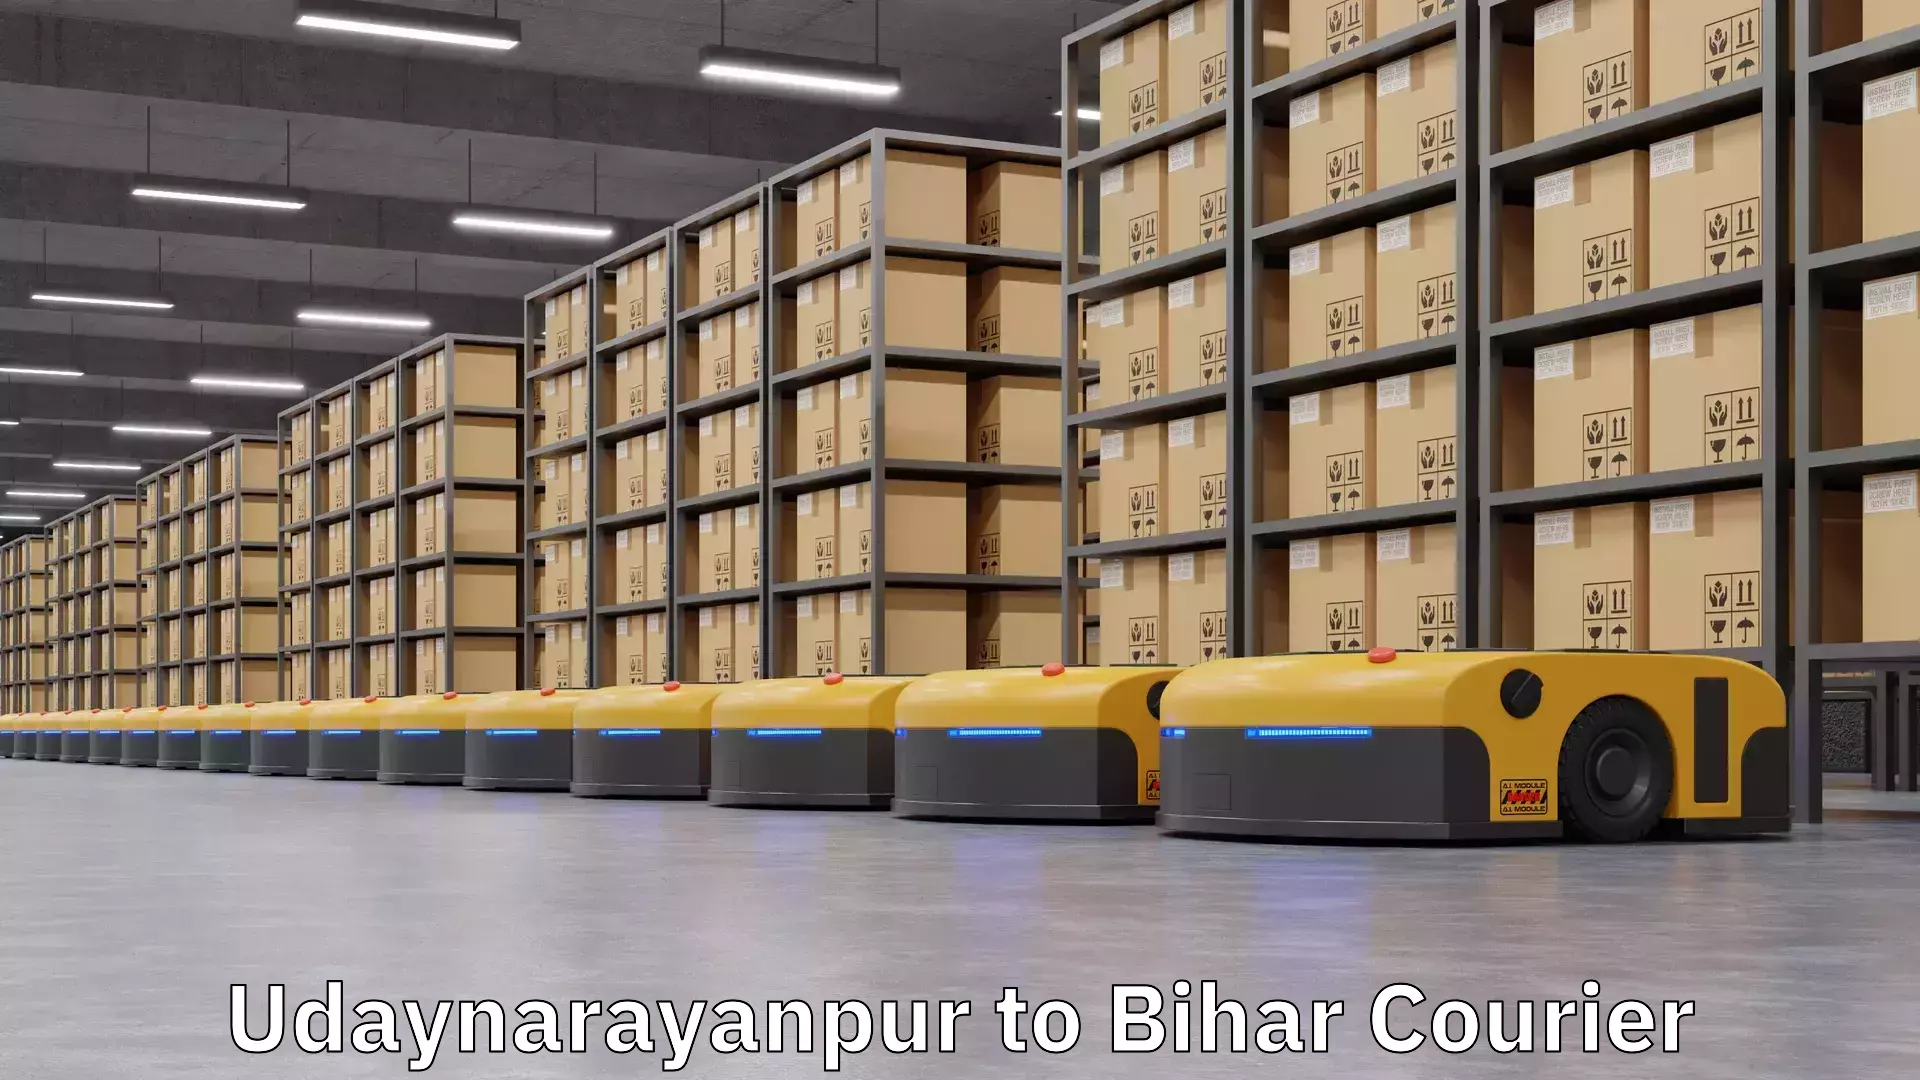 Package delivery network Udaynarayanpur to Bihar